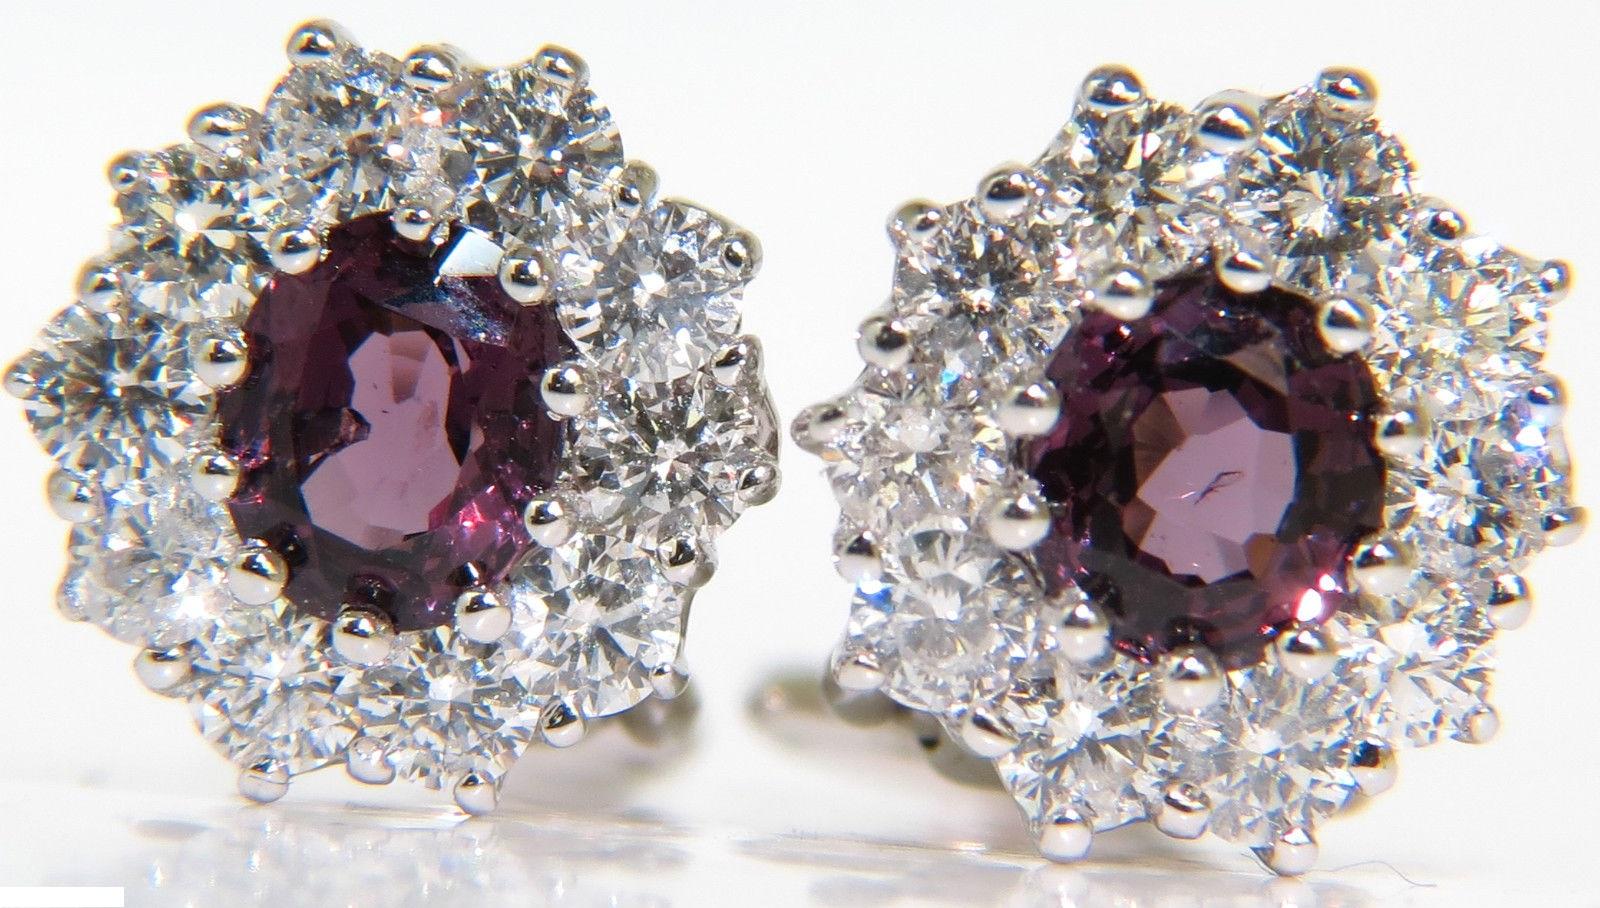 14 Karat 3.36 Carat Natural Purple Spinel Diamond Cluster Earrings and Omega For Sale 2